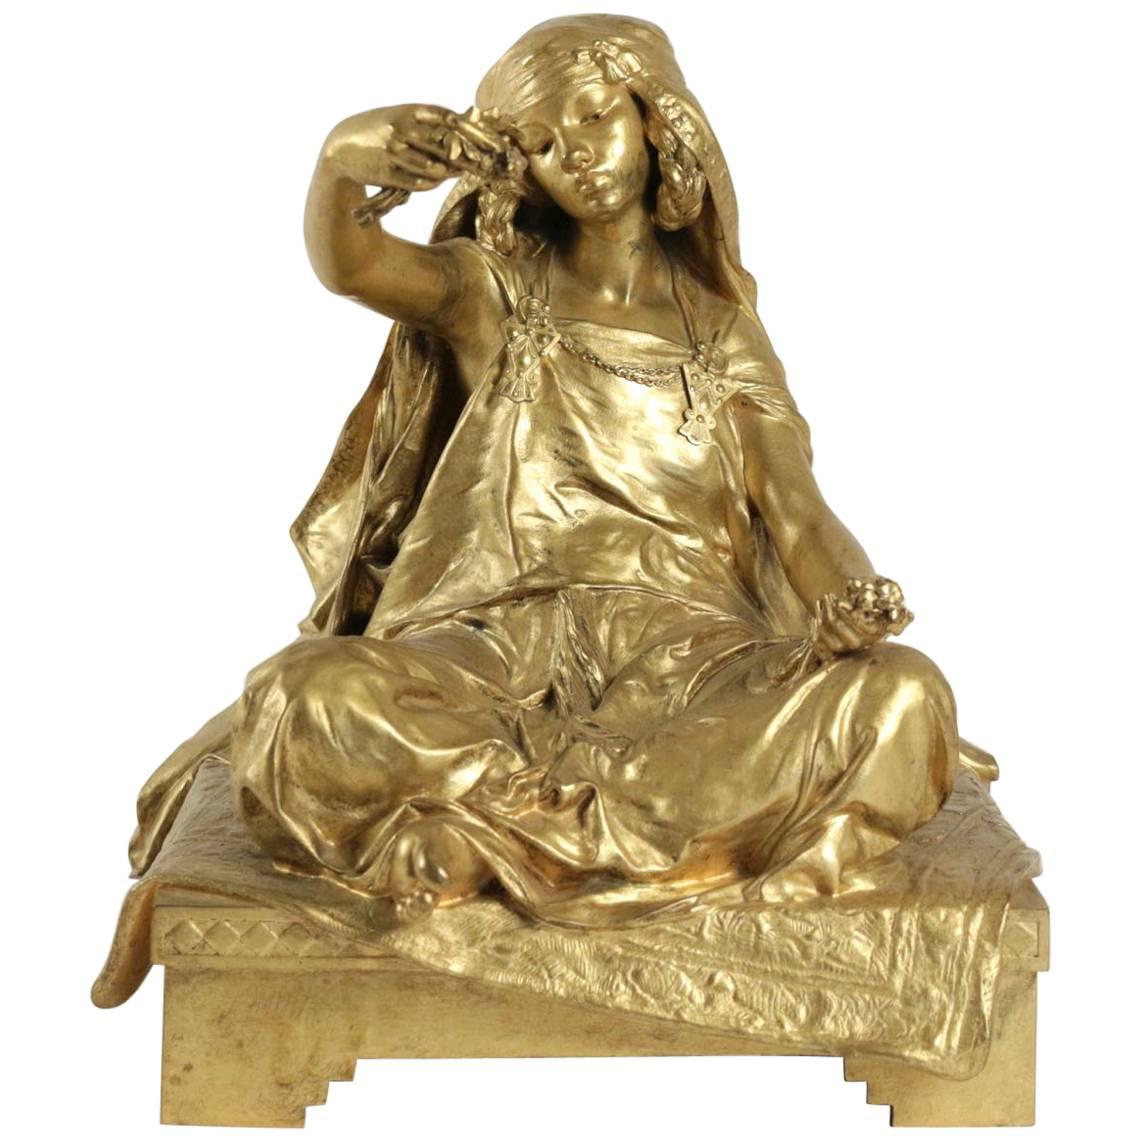 Bronze by Louis Ernest Barrias, “Little Girl Seated”